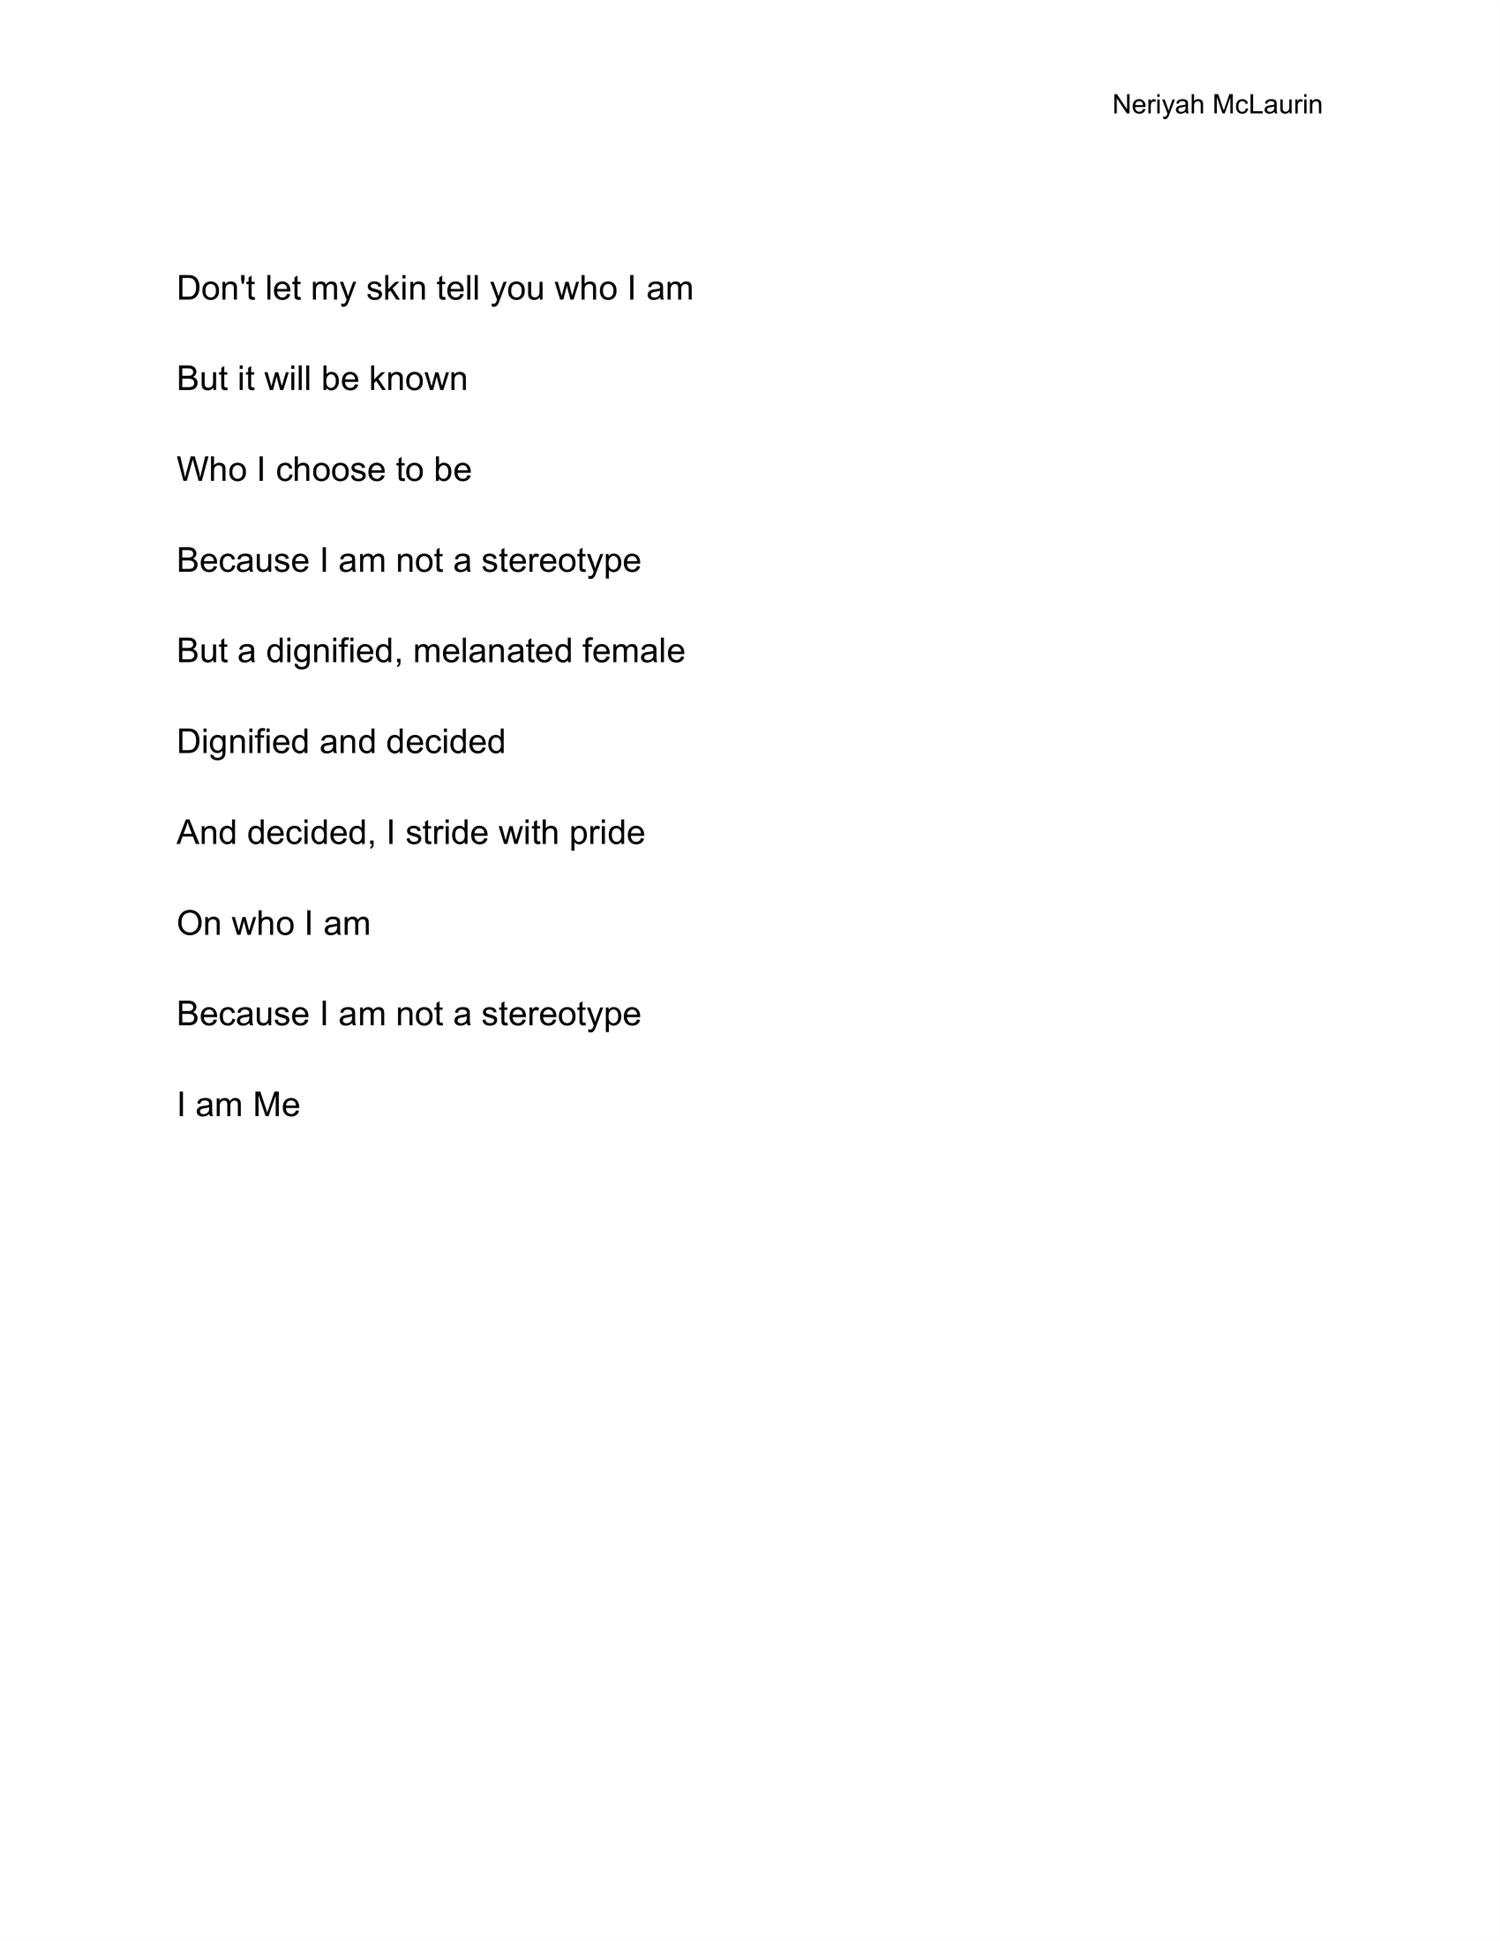 Poem "I am Me," by Neriyah McLaurin.